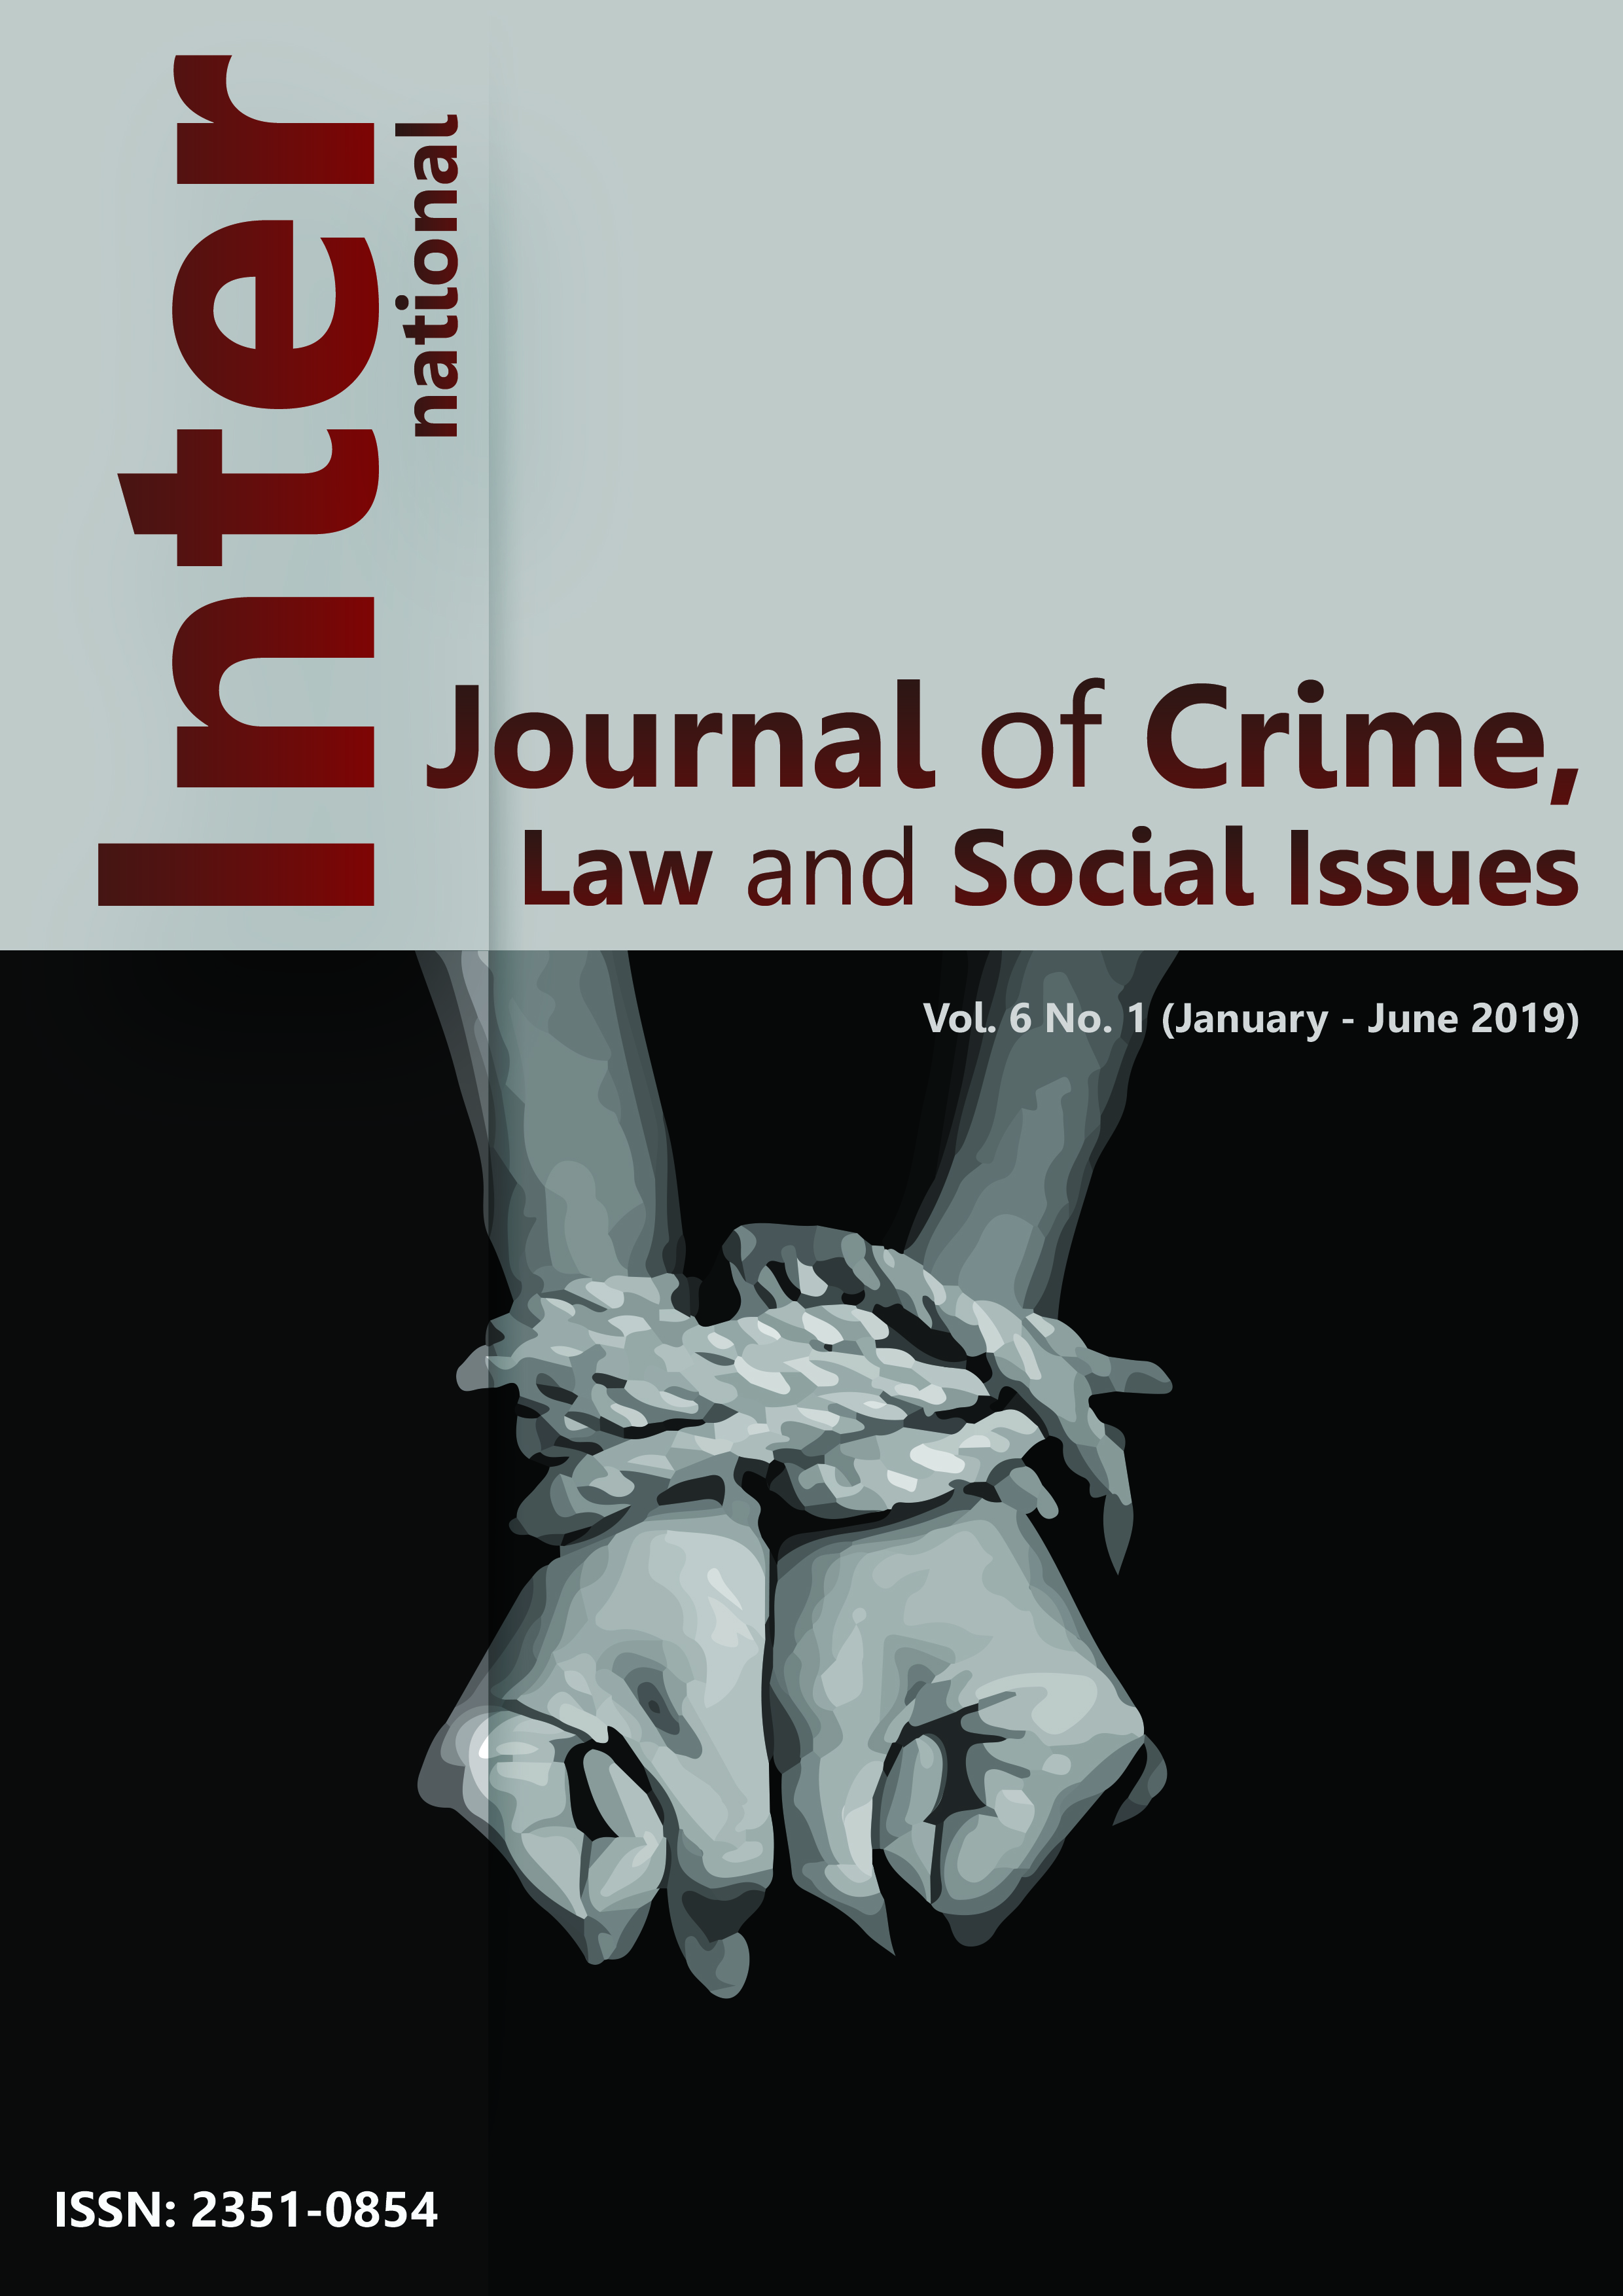 					View Vol. 6 No. 1 (2019): International Journal of Crime, Law and Social Issues, Vol. 6, No. 1, 2019
				